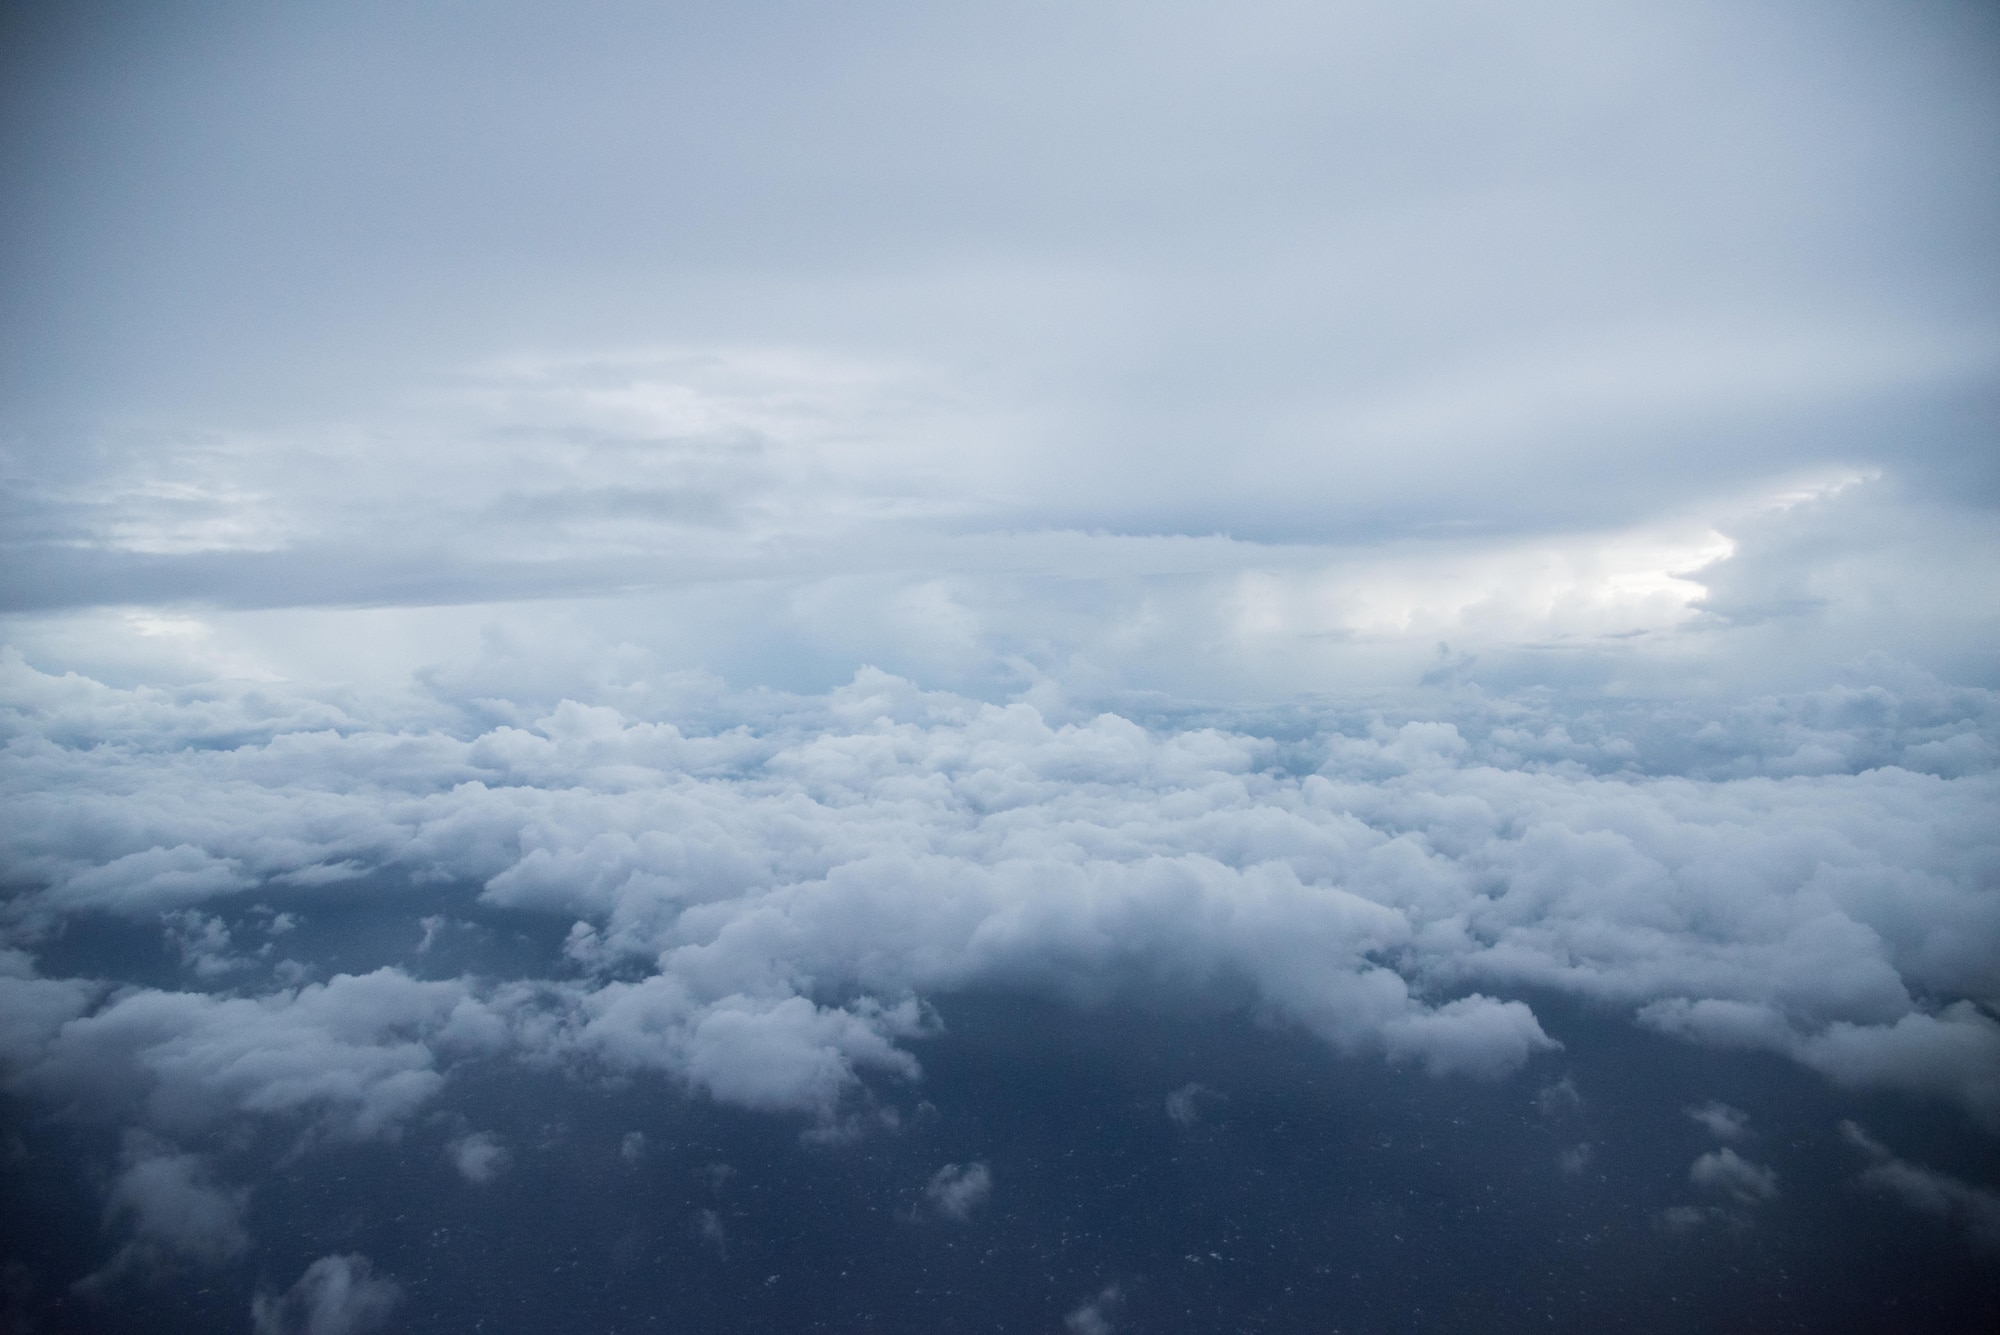 Clouds form in the eye of Hurricane Harvey during a flight into the storm by the 53rd Weather Reconnaissance Squadron Hurricane Hunters Aug. 24, 2017 out of Keesler Air Force Base, Mississippi. (U.S. Air Force photo/Staff Sgt. Heather Heiney)